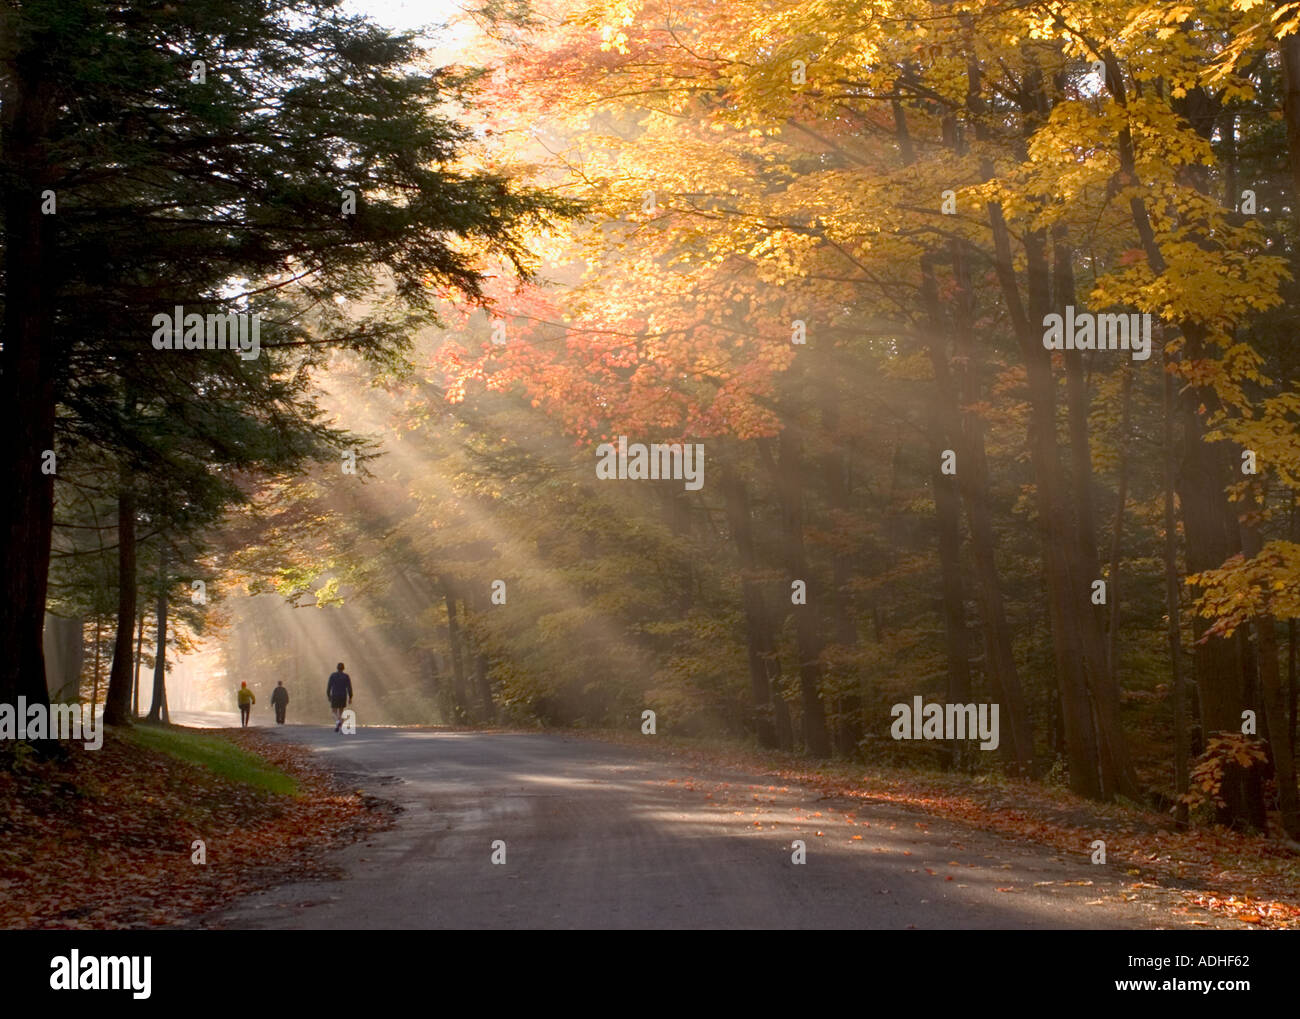 People walking on road in backlit fog in fall colored trees in Chestnut Ridge Park in Western New York State Stock Photo